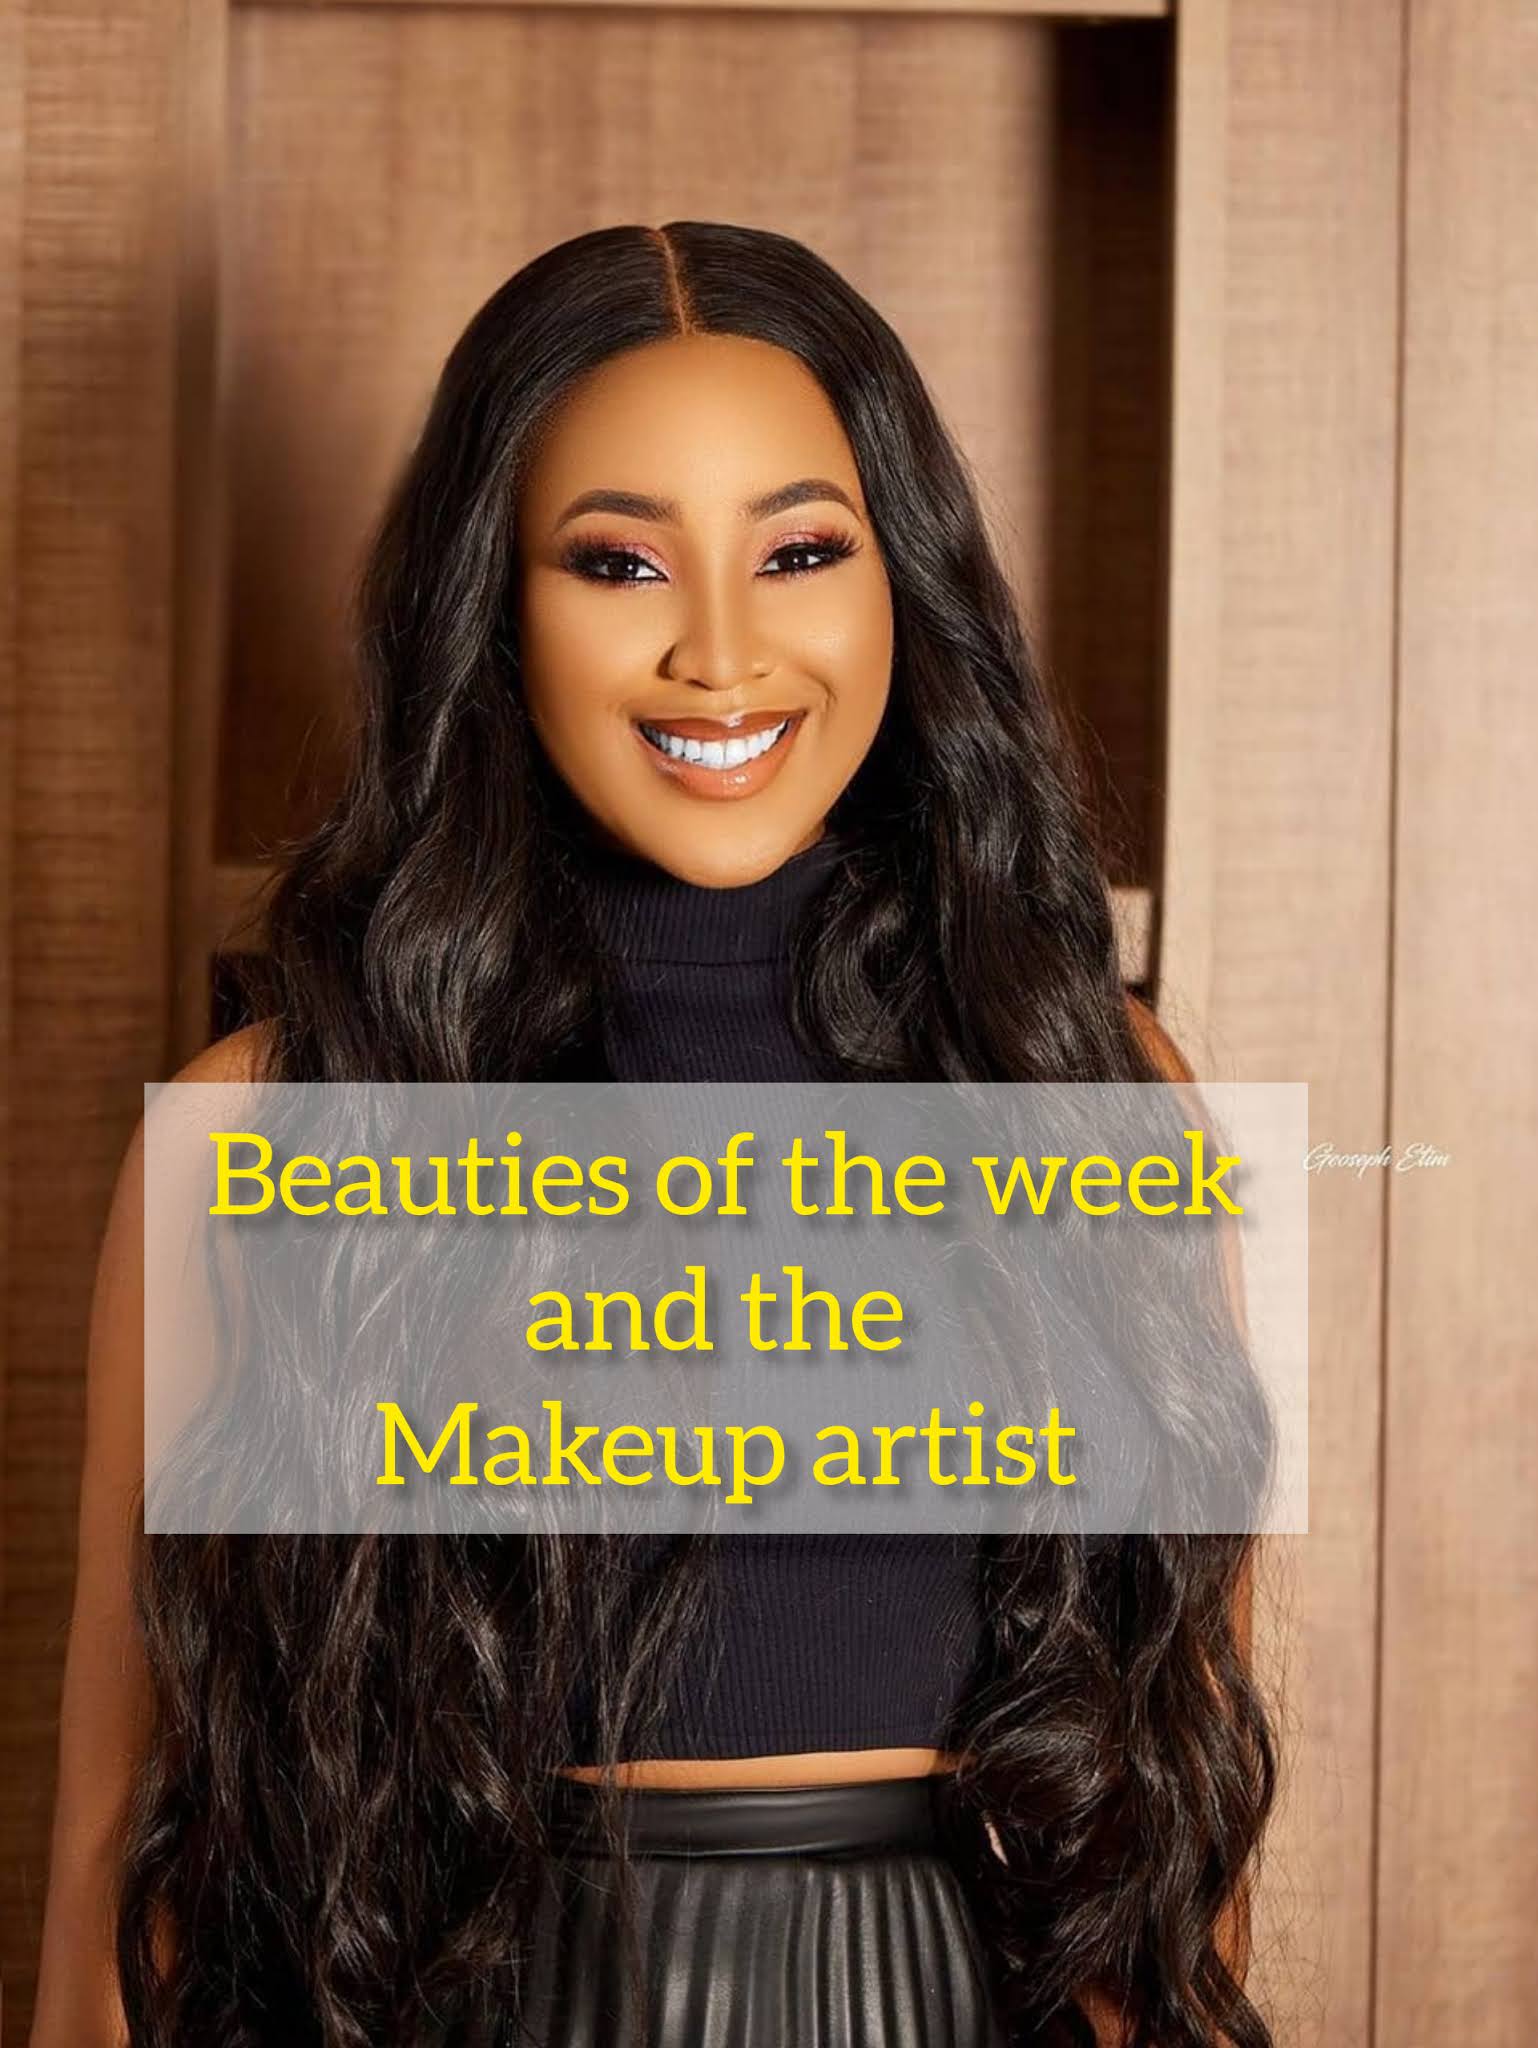 Beauties of the week and the makeup artist.